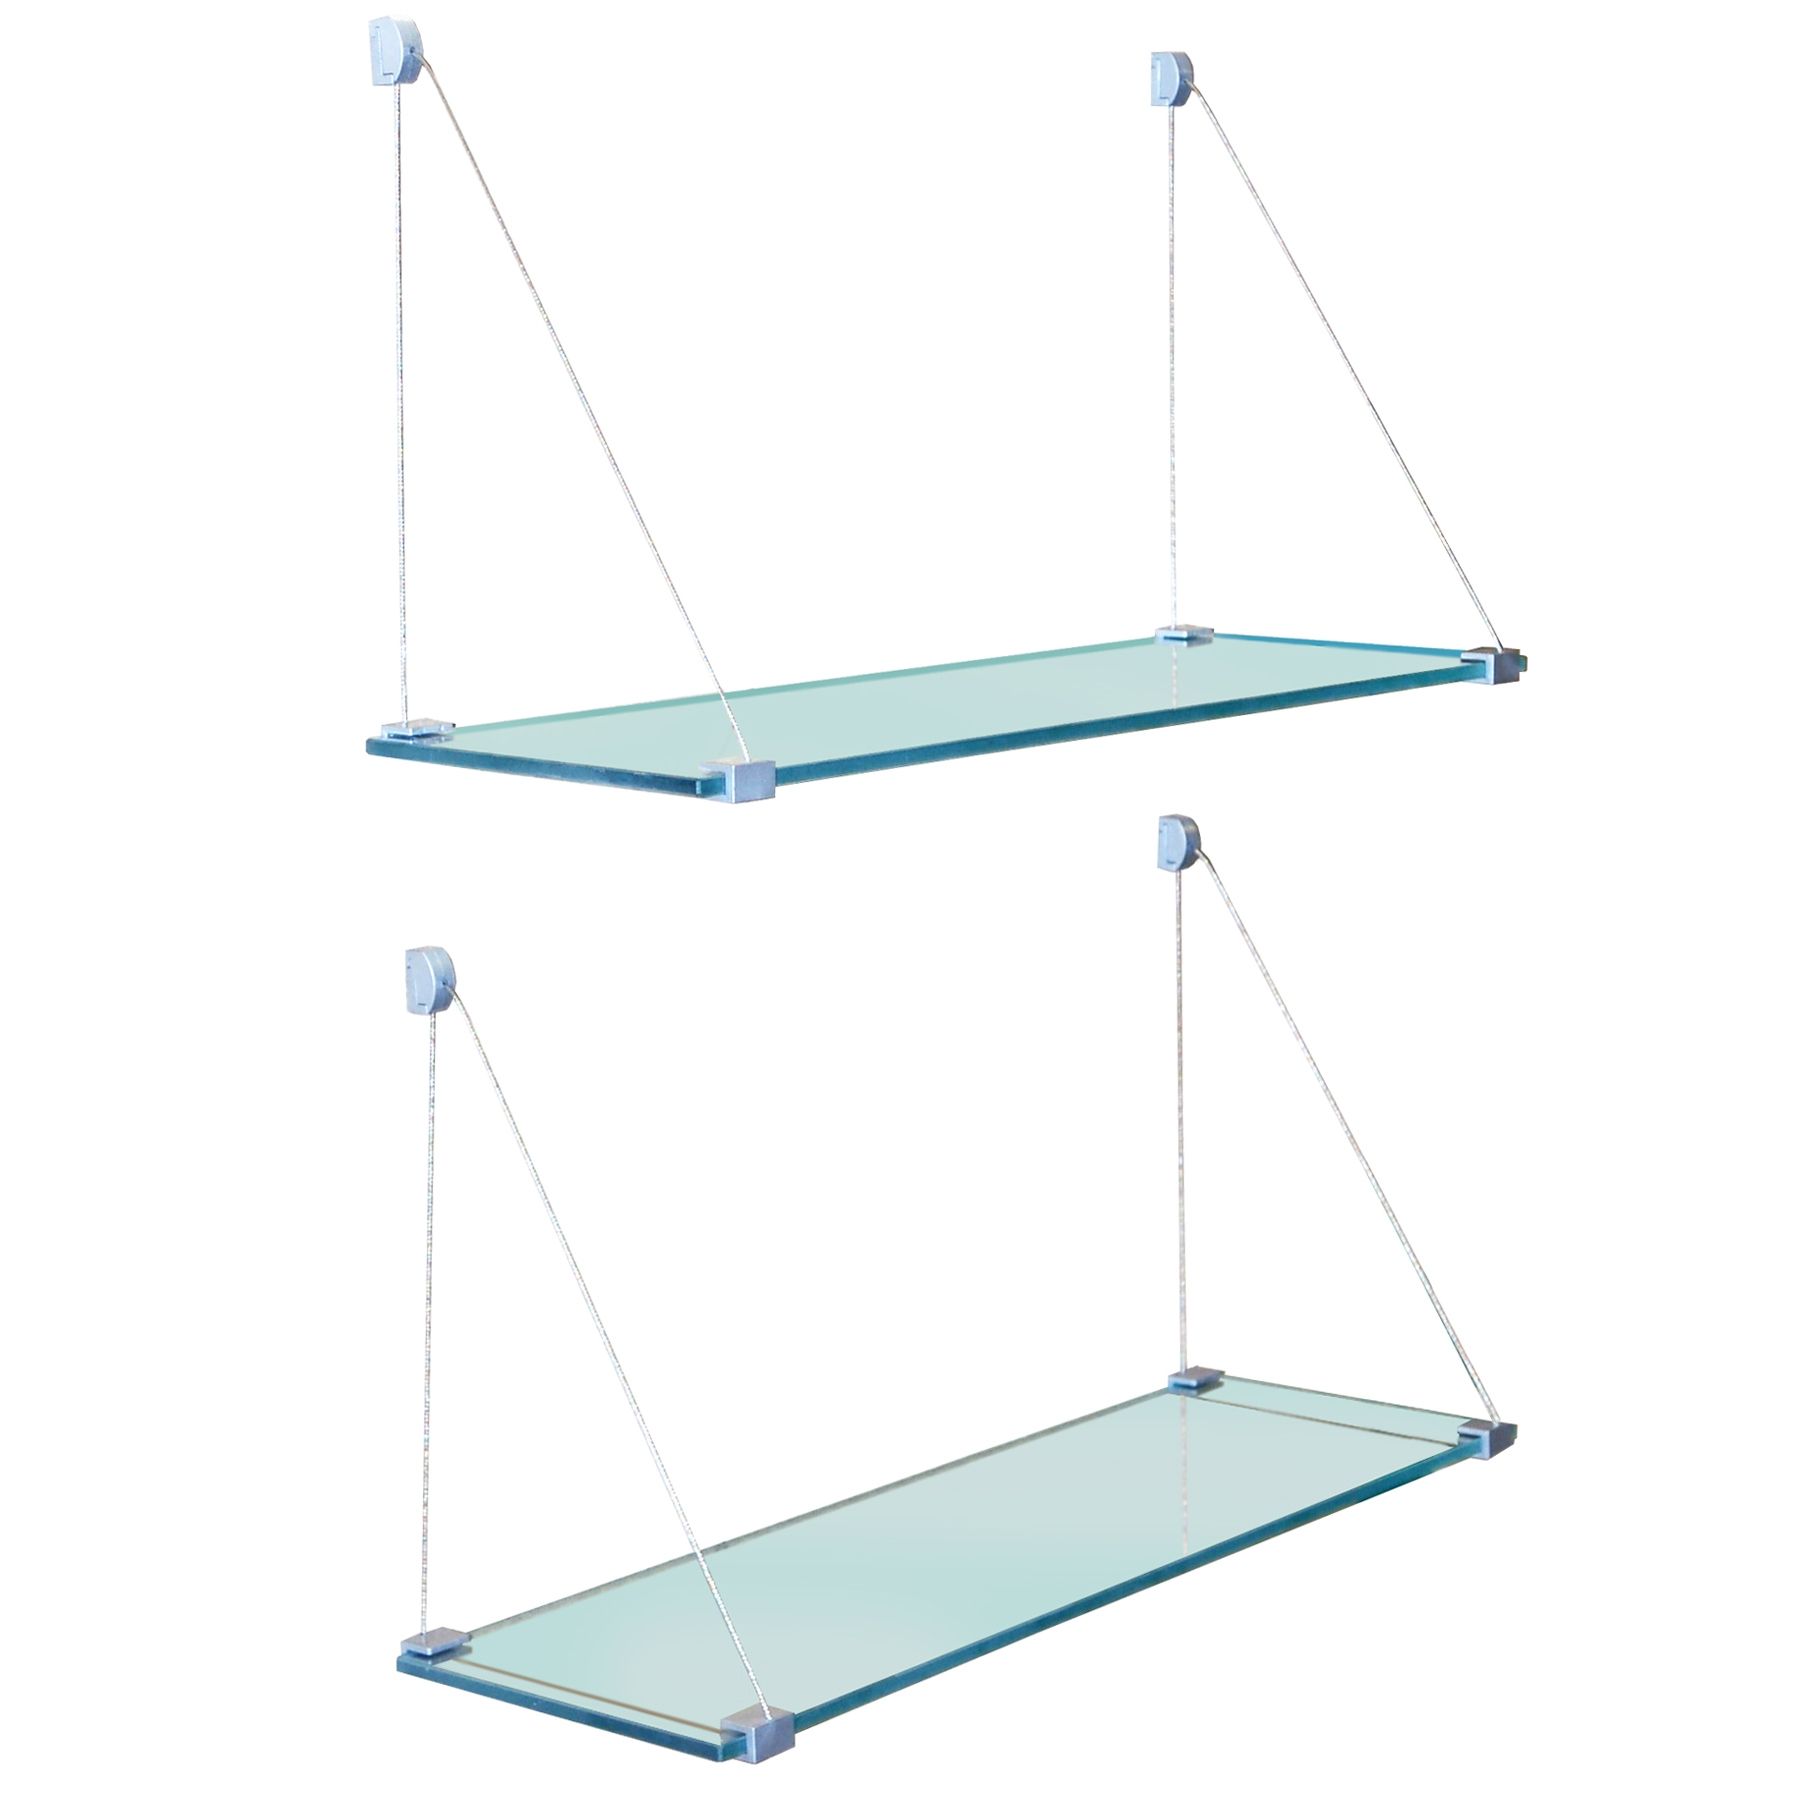 How Glass Shelves For Bathroom Home Decorations Throughout Wire Suspended Glass Shelves (View 2 of 15)